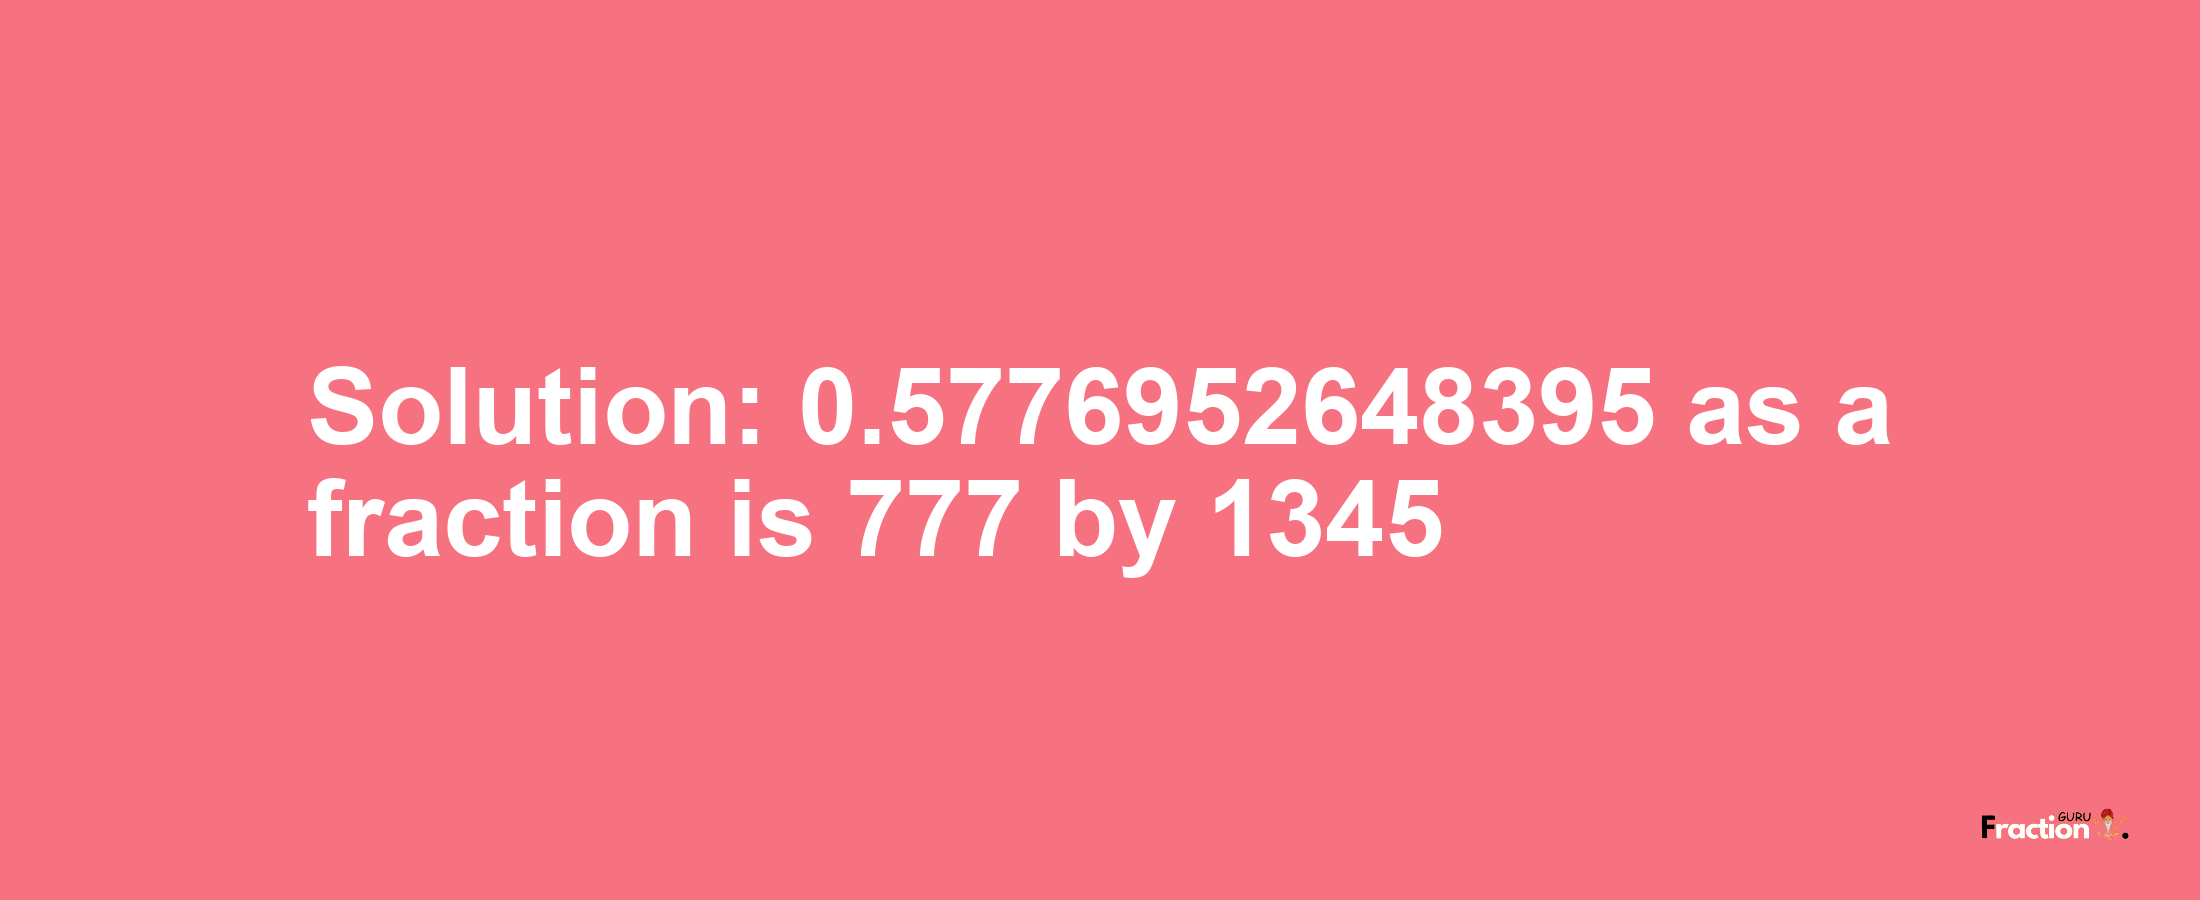 Solution:0.5776952648395 as a fraction is 777/1345